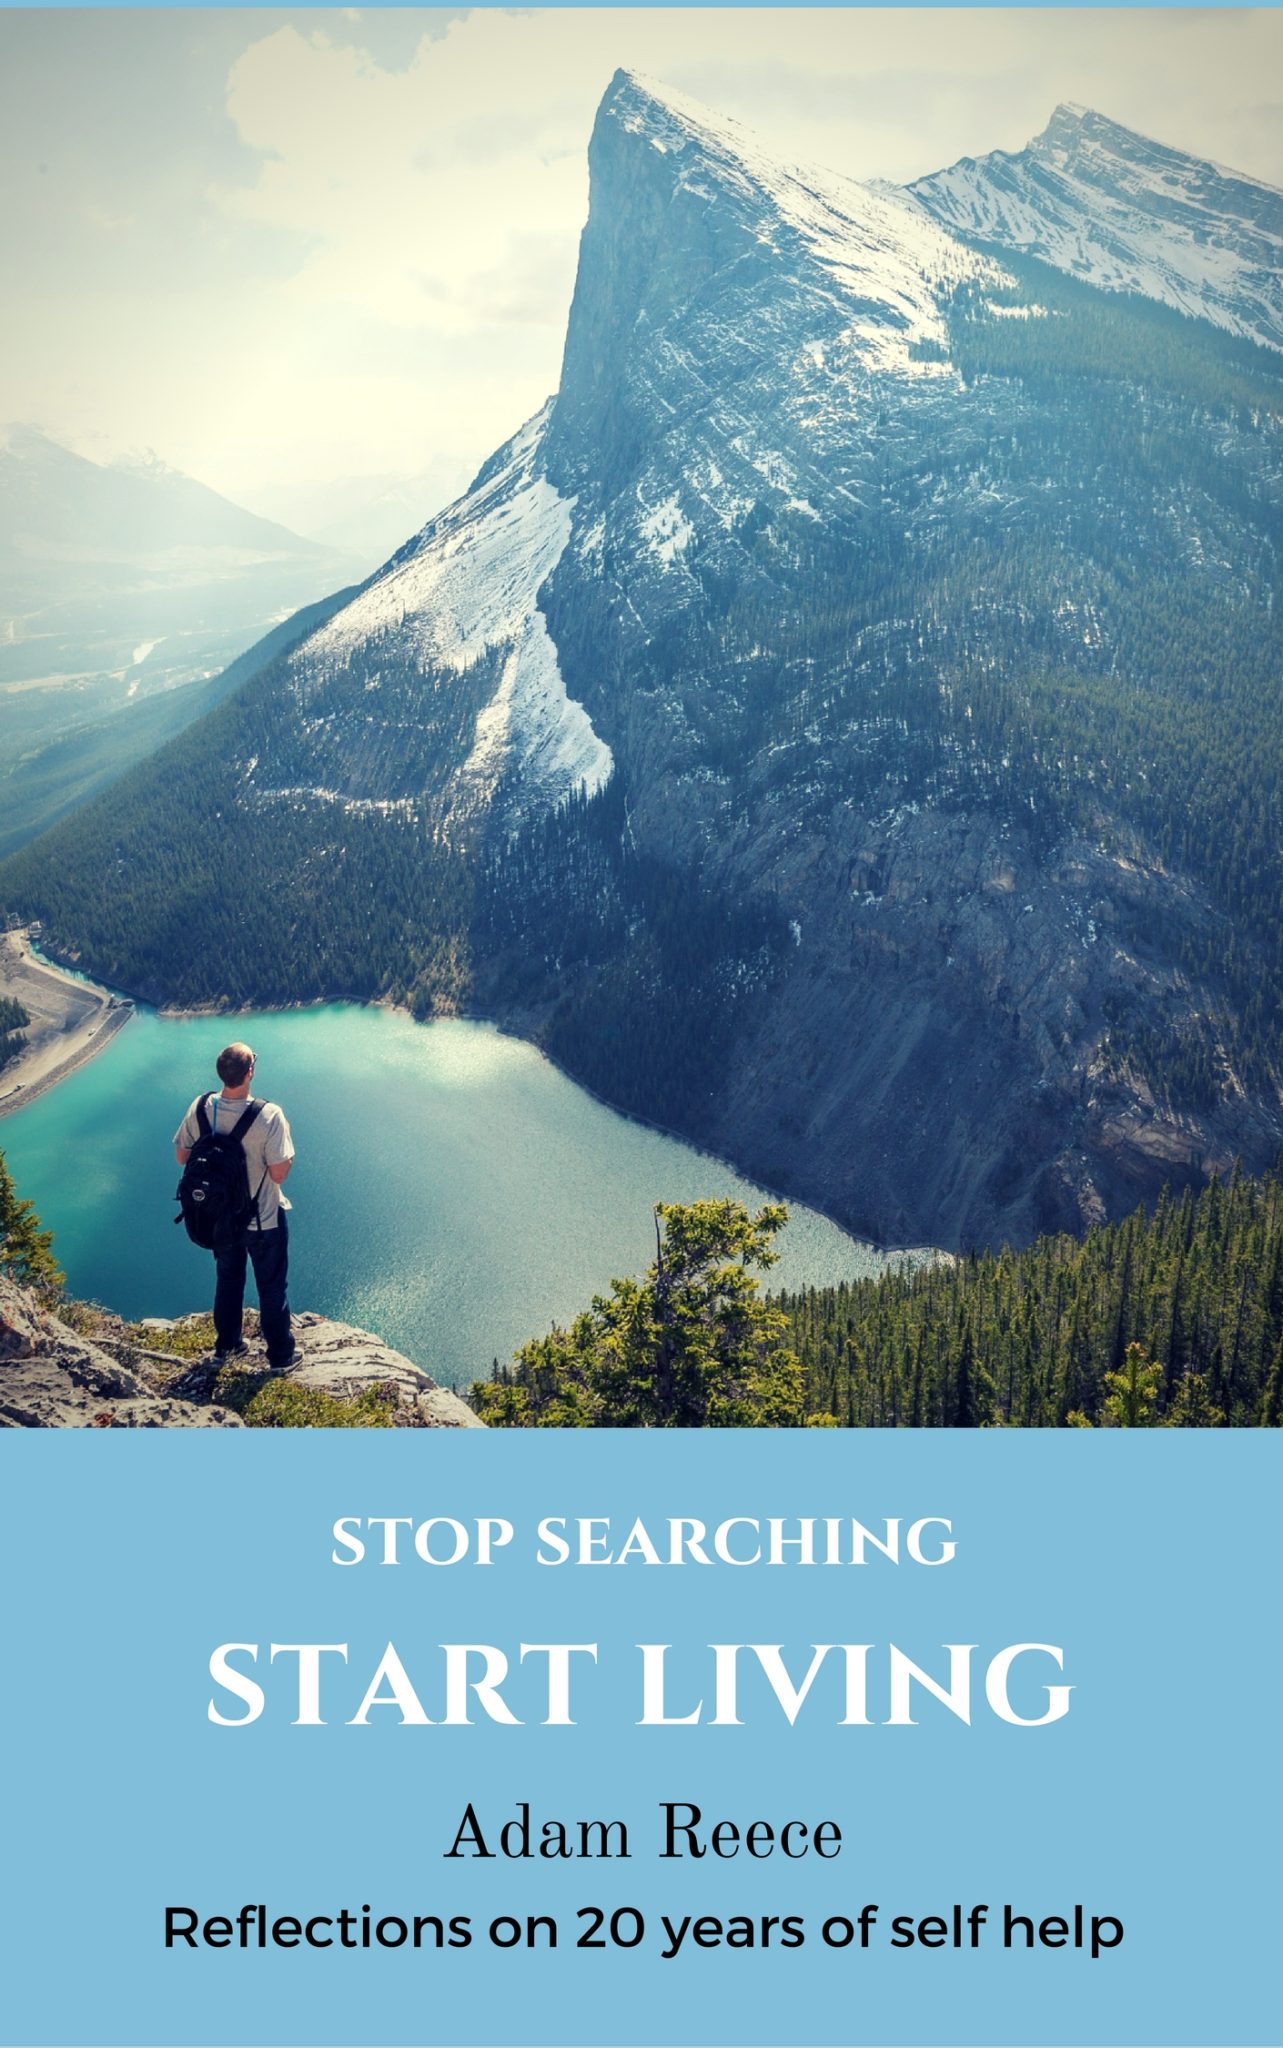 FREE: Stop Searching Start Living: Reflections on 20 Years of Self Help by Adam Reece